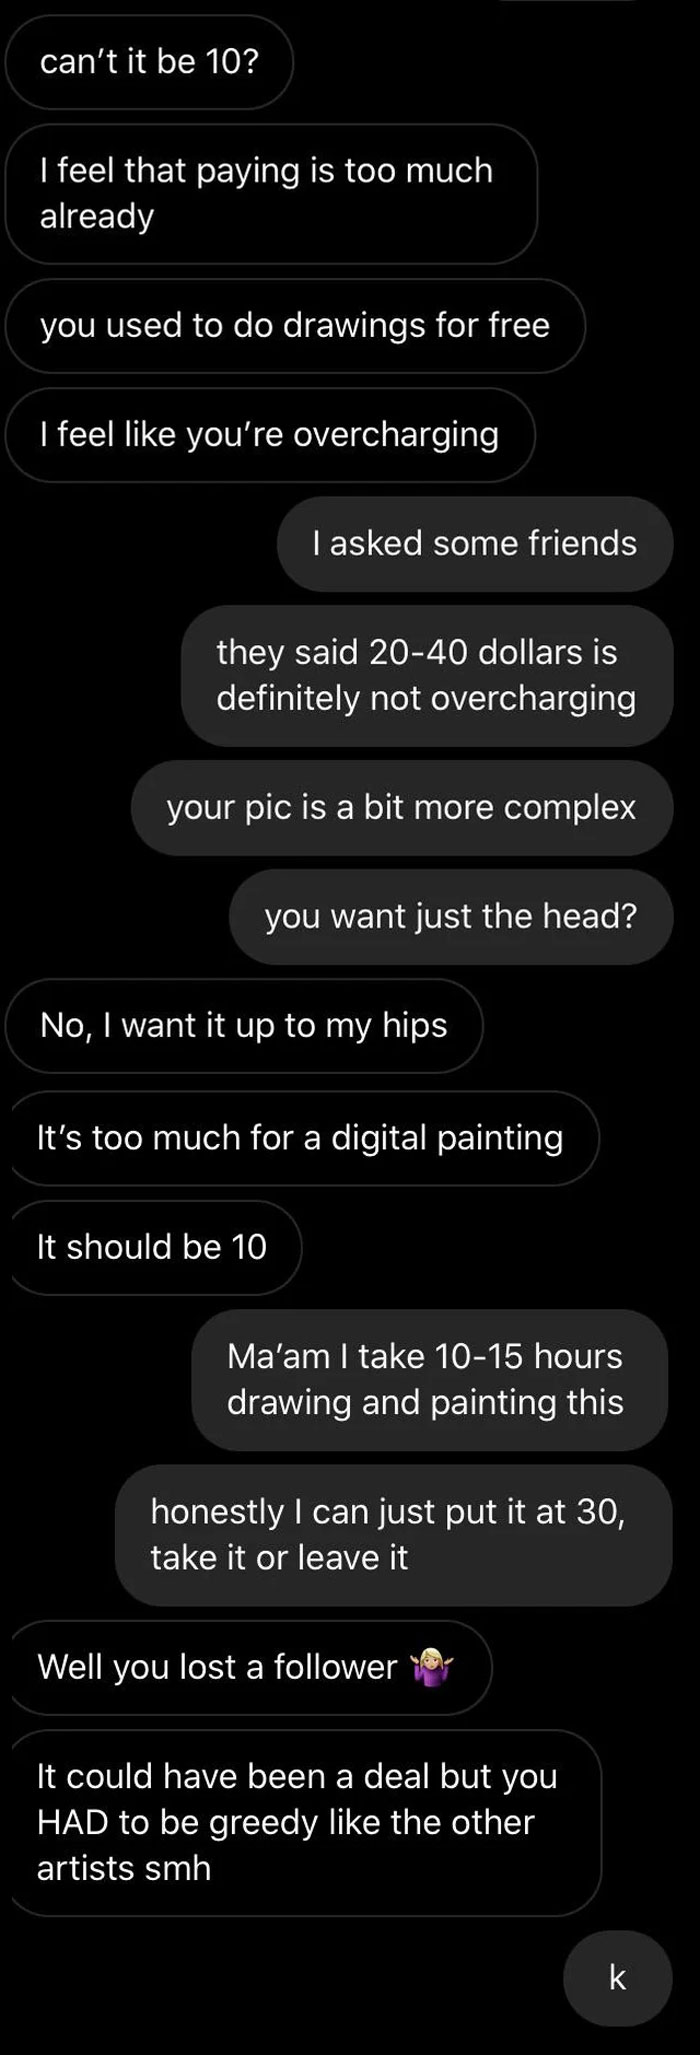 I Charge 20-50 Dollars For A Realistic Portrait And One Of My Followers Just Said I’m Overcharging (I Never Made An Advertisement, I Just Say Yes When People Ask Since I’m Just A Hobbyist)